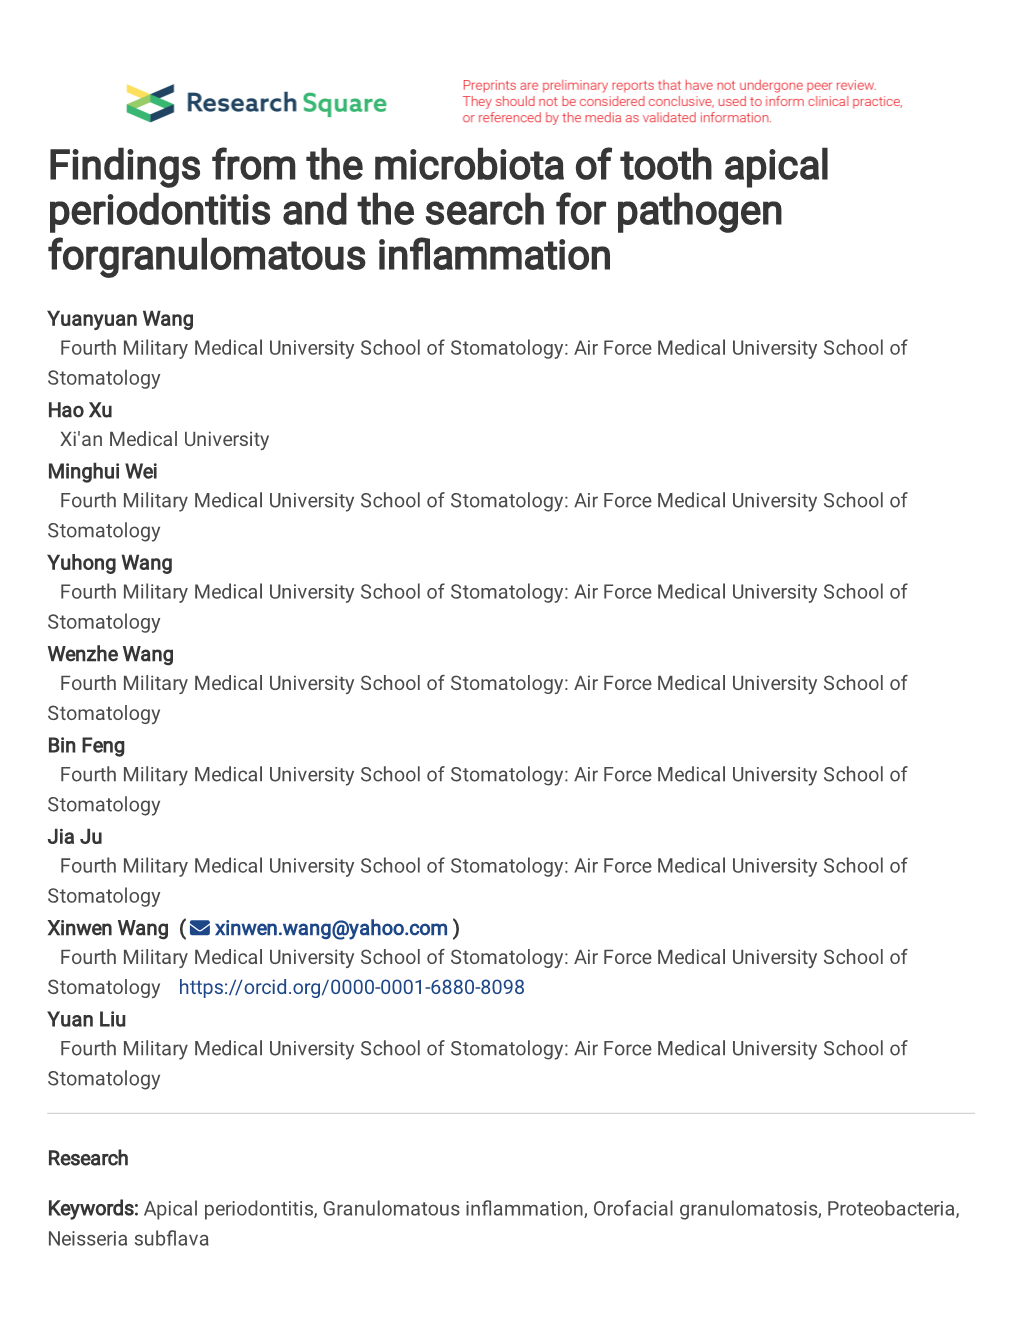 Findings from the Microbiota of Tooth Apical Periodontitis and the Search for Pathogen Forgranulomatous In�Ammation